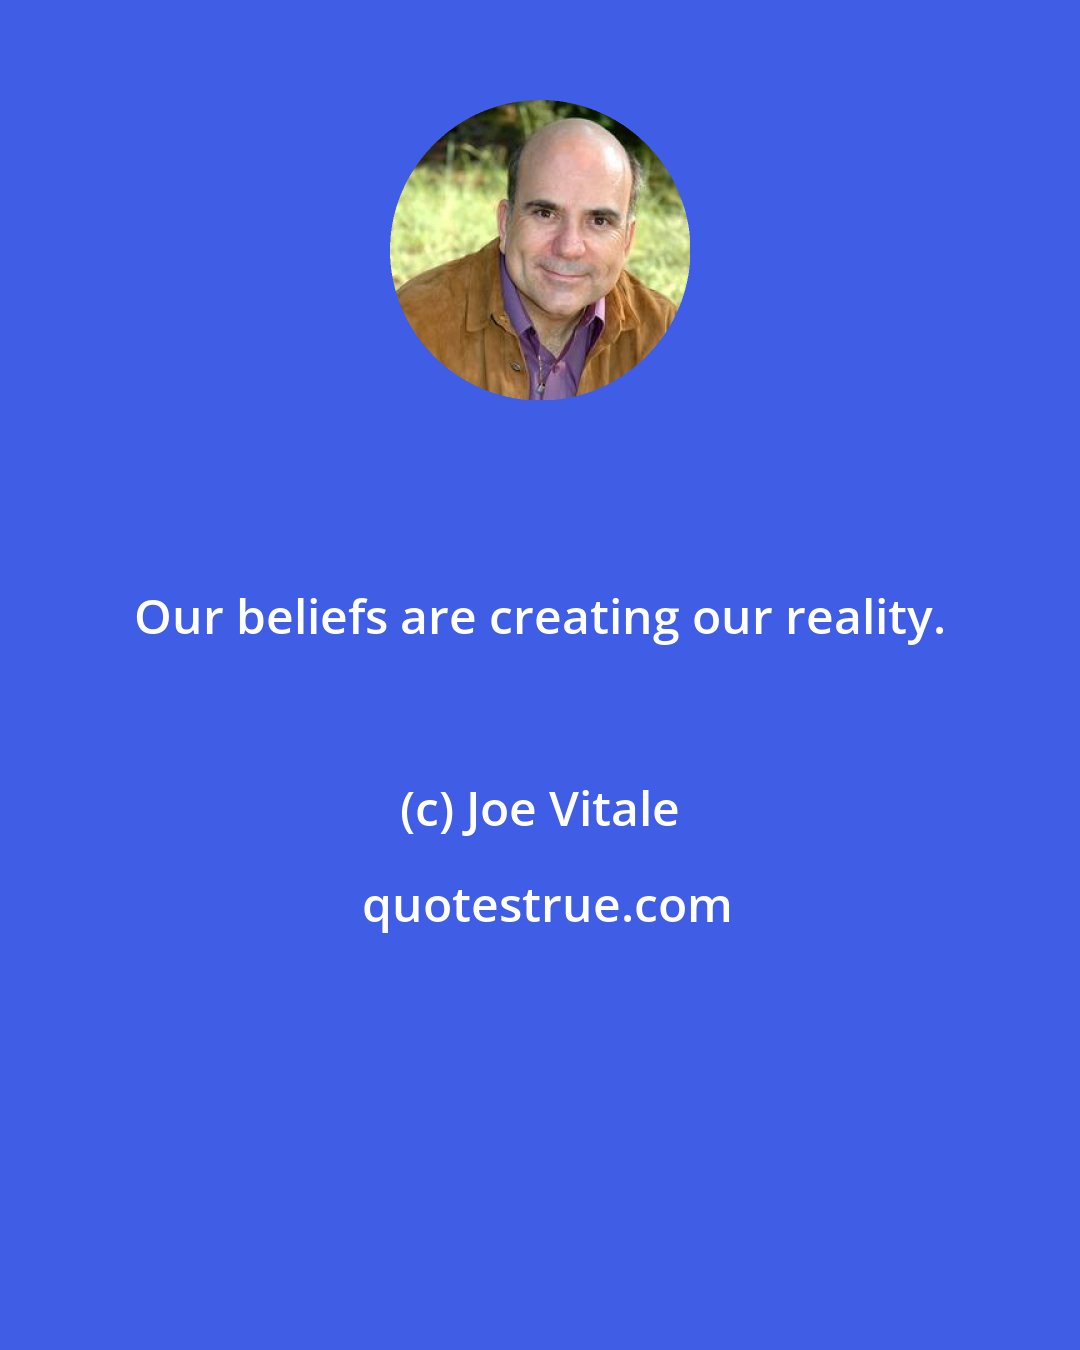 Joe Vitale: Our beliefs are creating our reality.